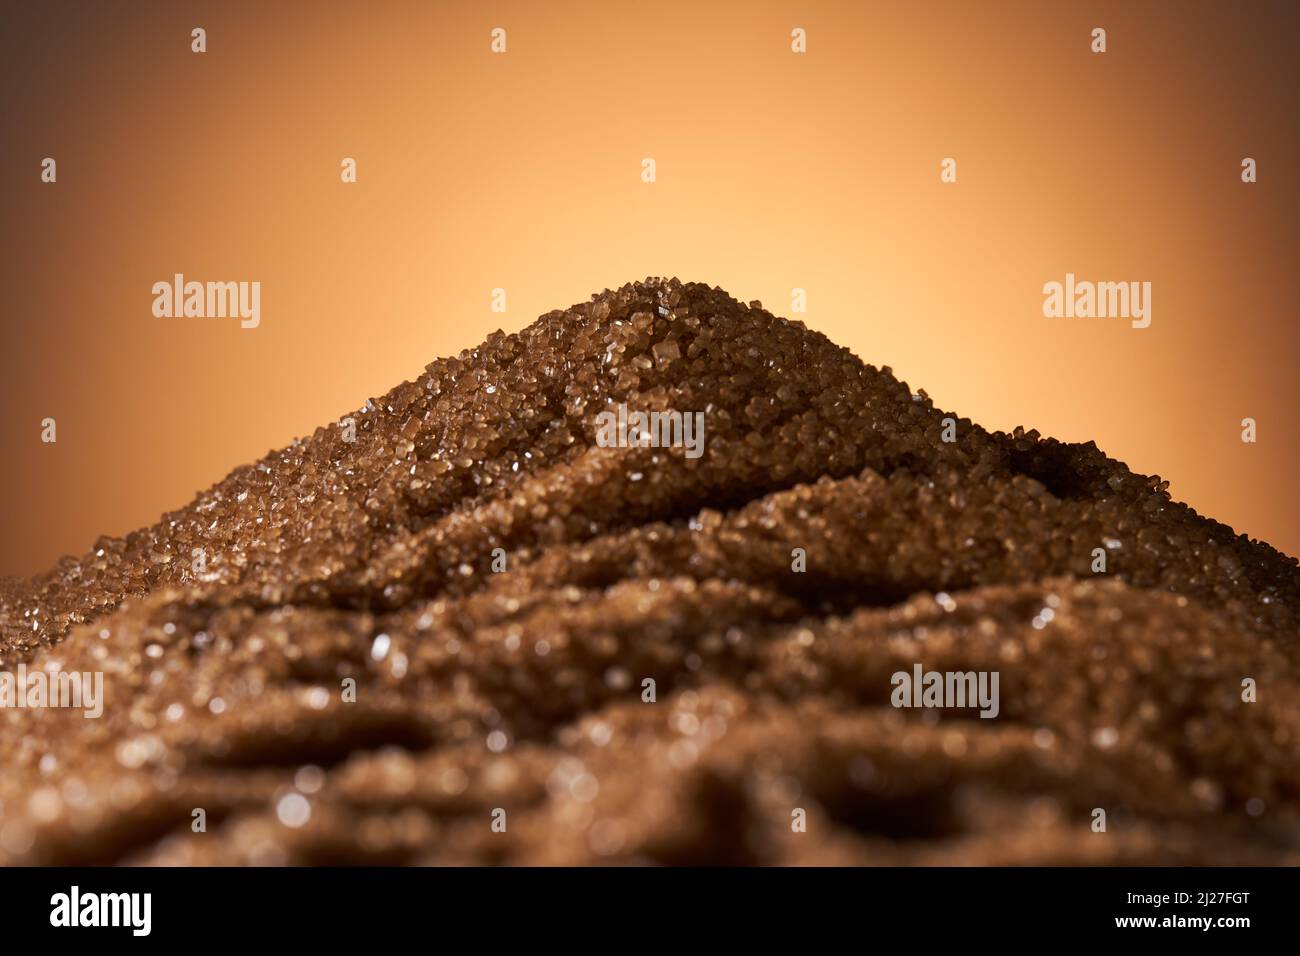 Hills of brown cane sugar, with sunset behind Stock Photo